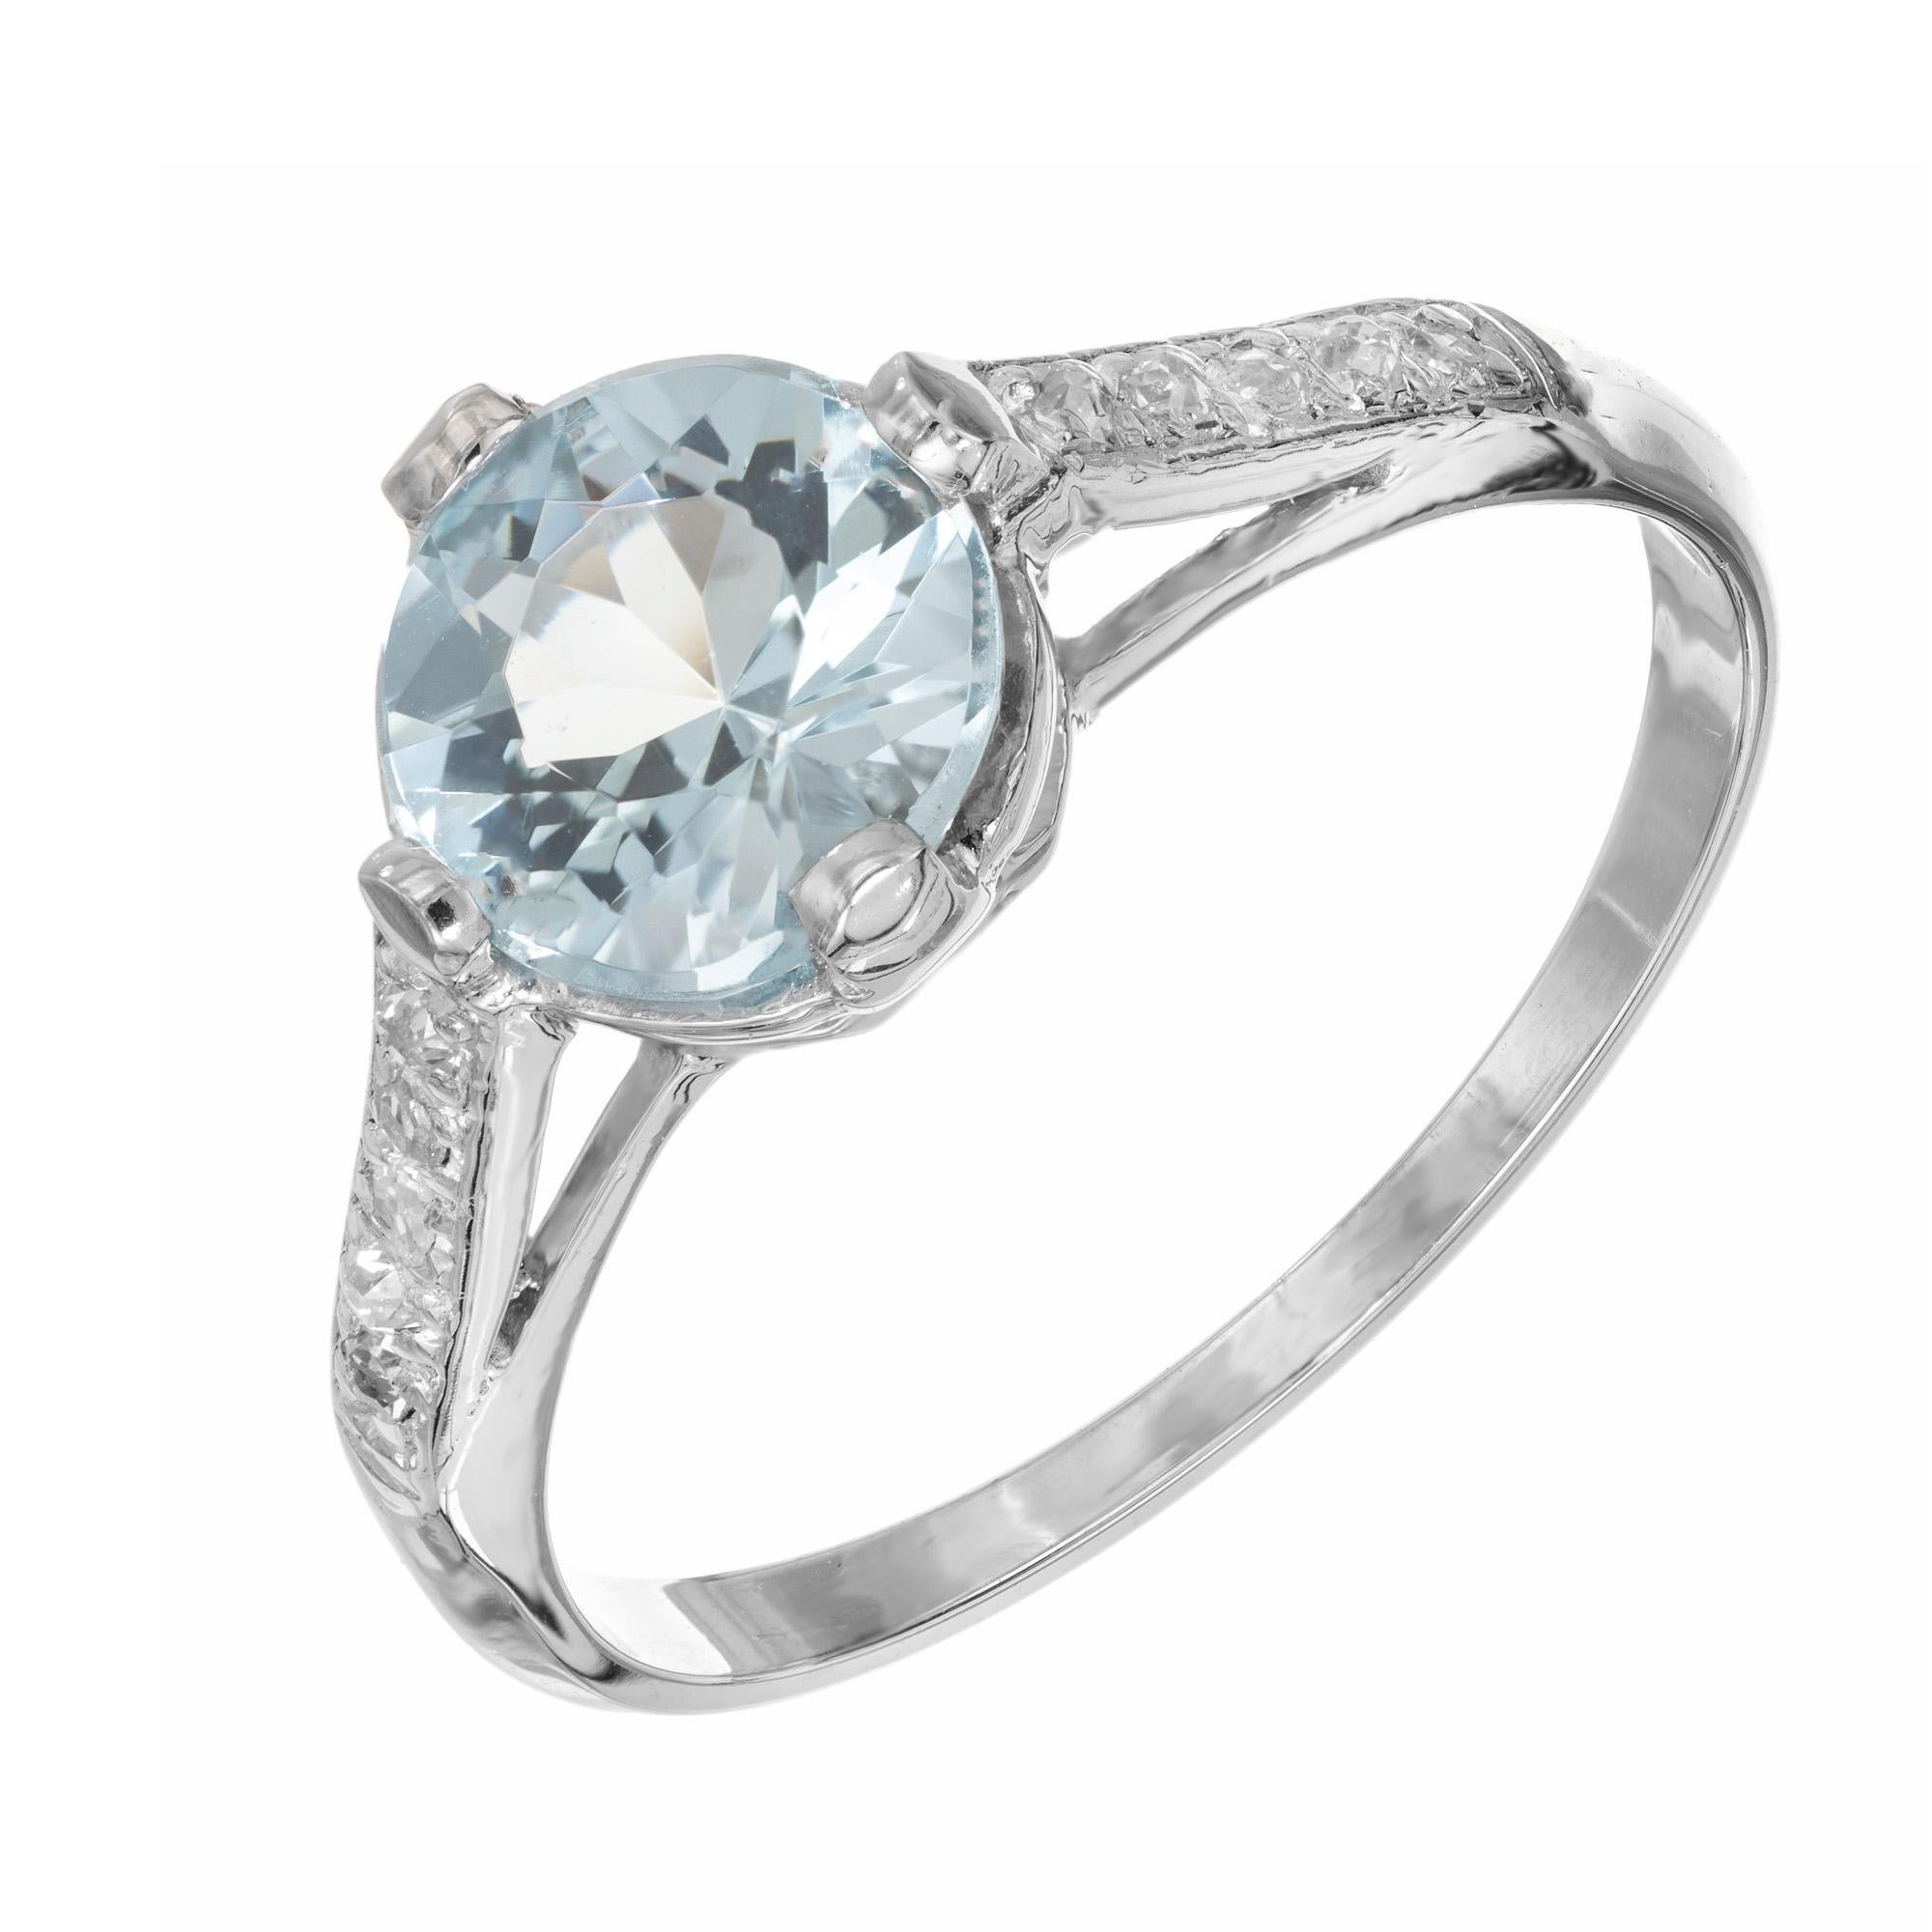 Aqua and diamond engagement ring. Beautiful bright round aquamarine center stone measuring 1.11cts. Mounted in a platinum four prong setting accented with 5 single cut diamonds along each shoulder.  This vintage ring dates back to the 1930's.

1